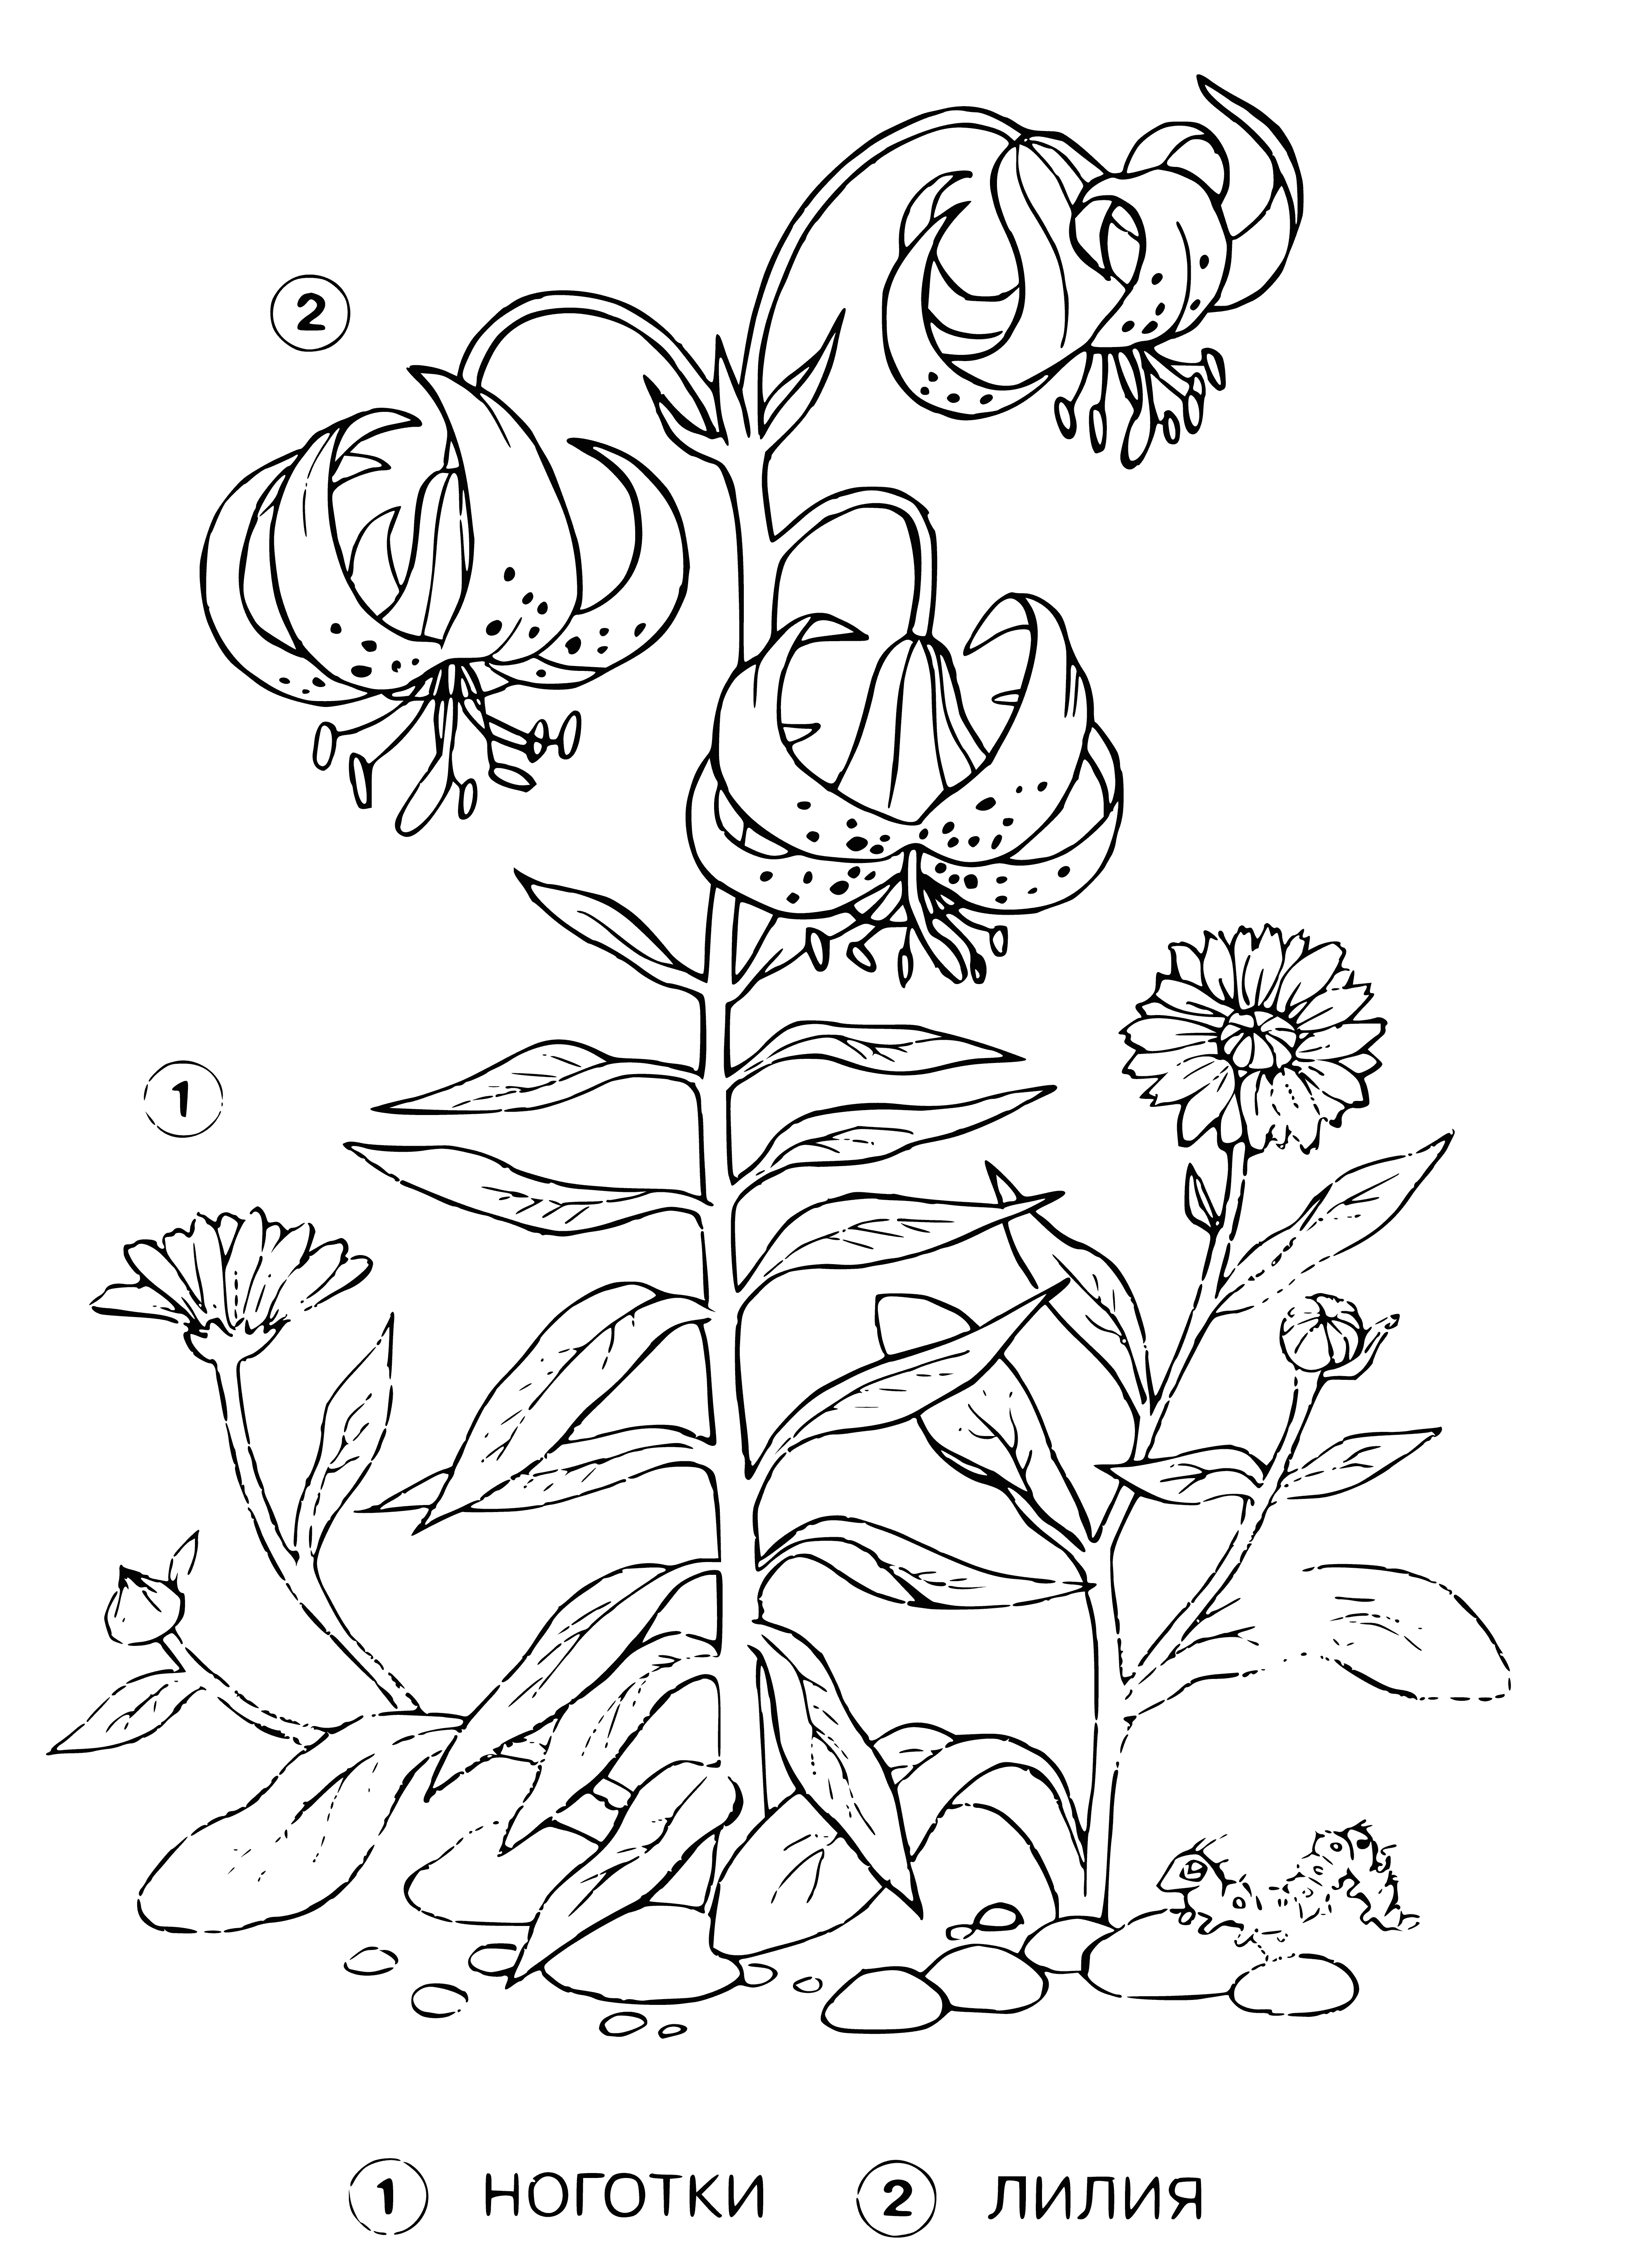 Lily and marigolds coloring page